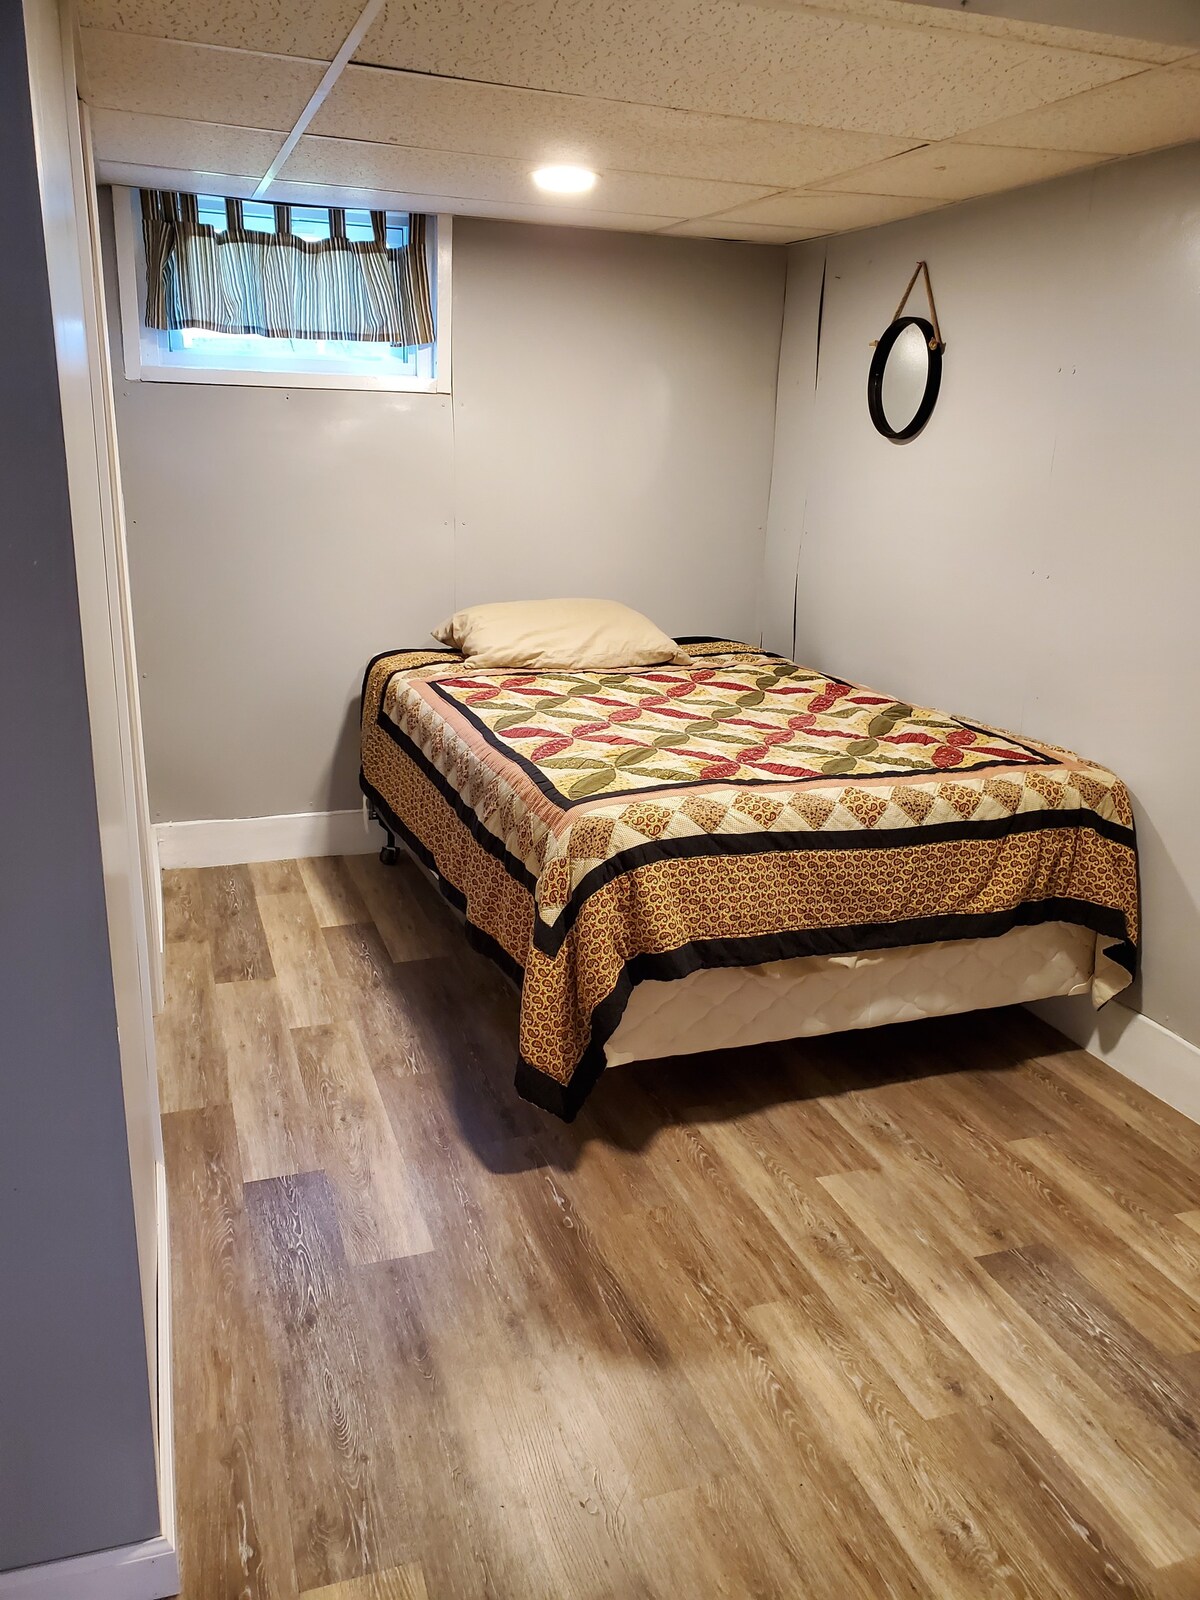 Remodeled basement apartment for workers!